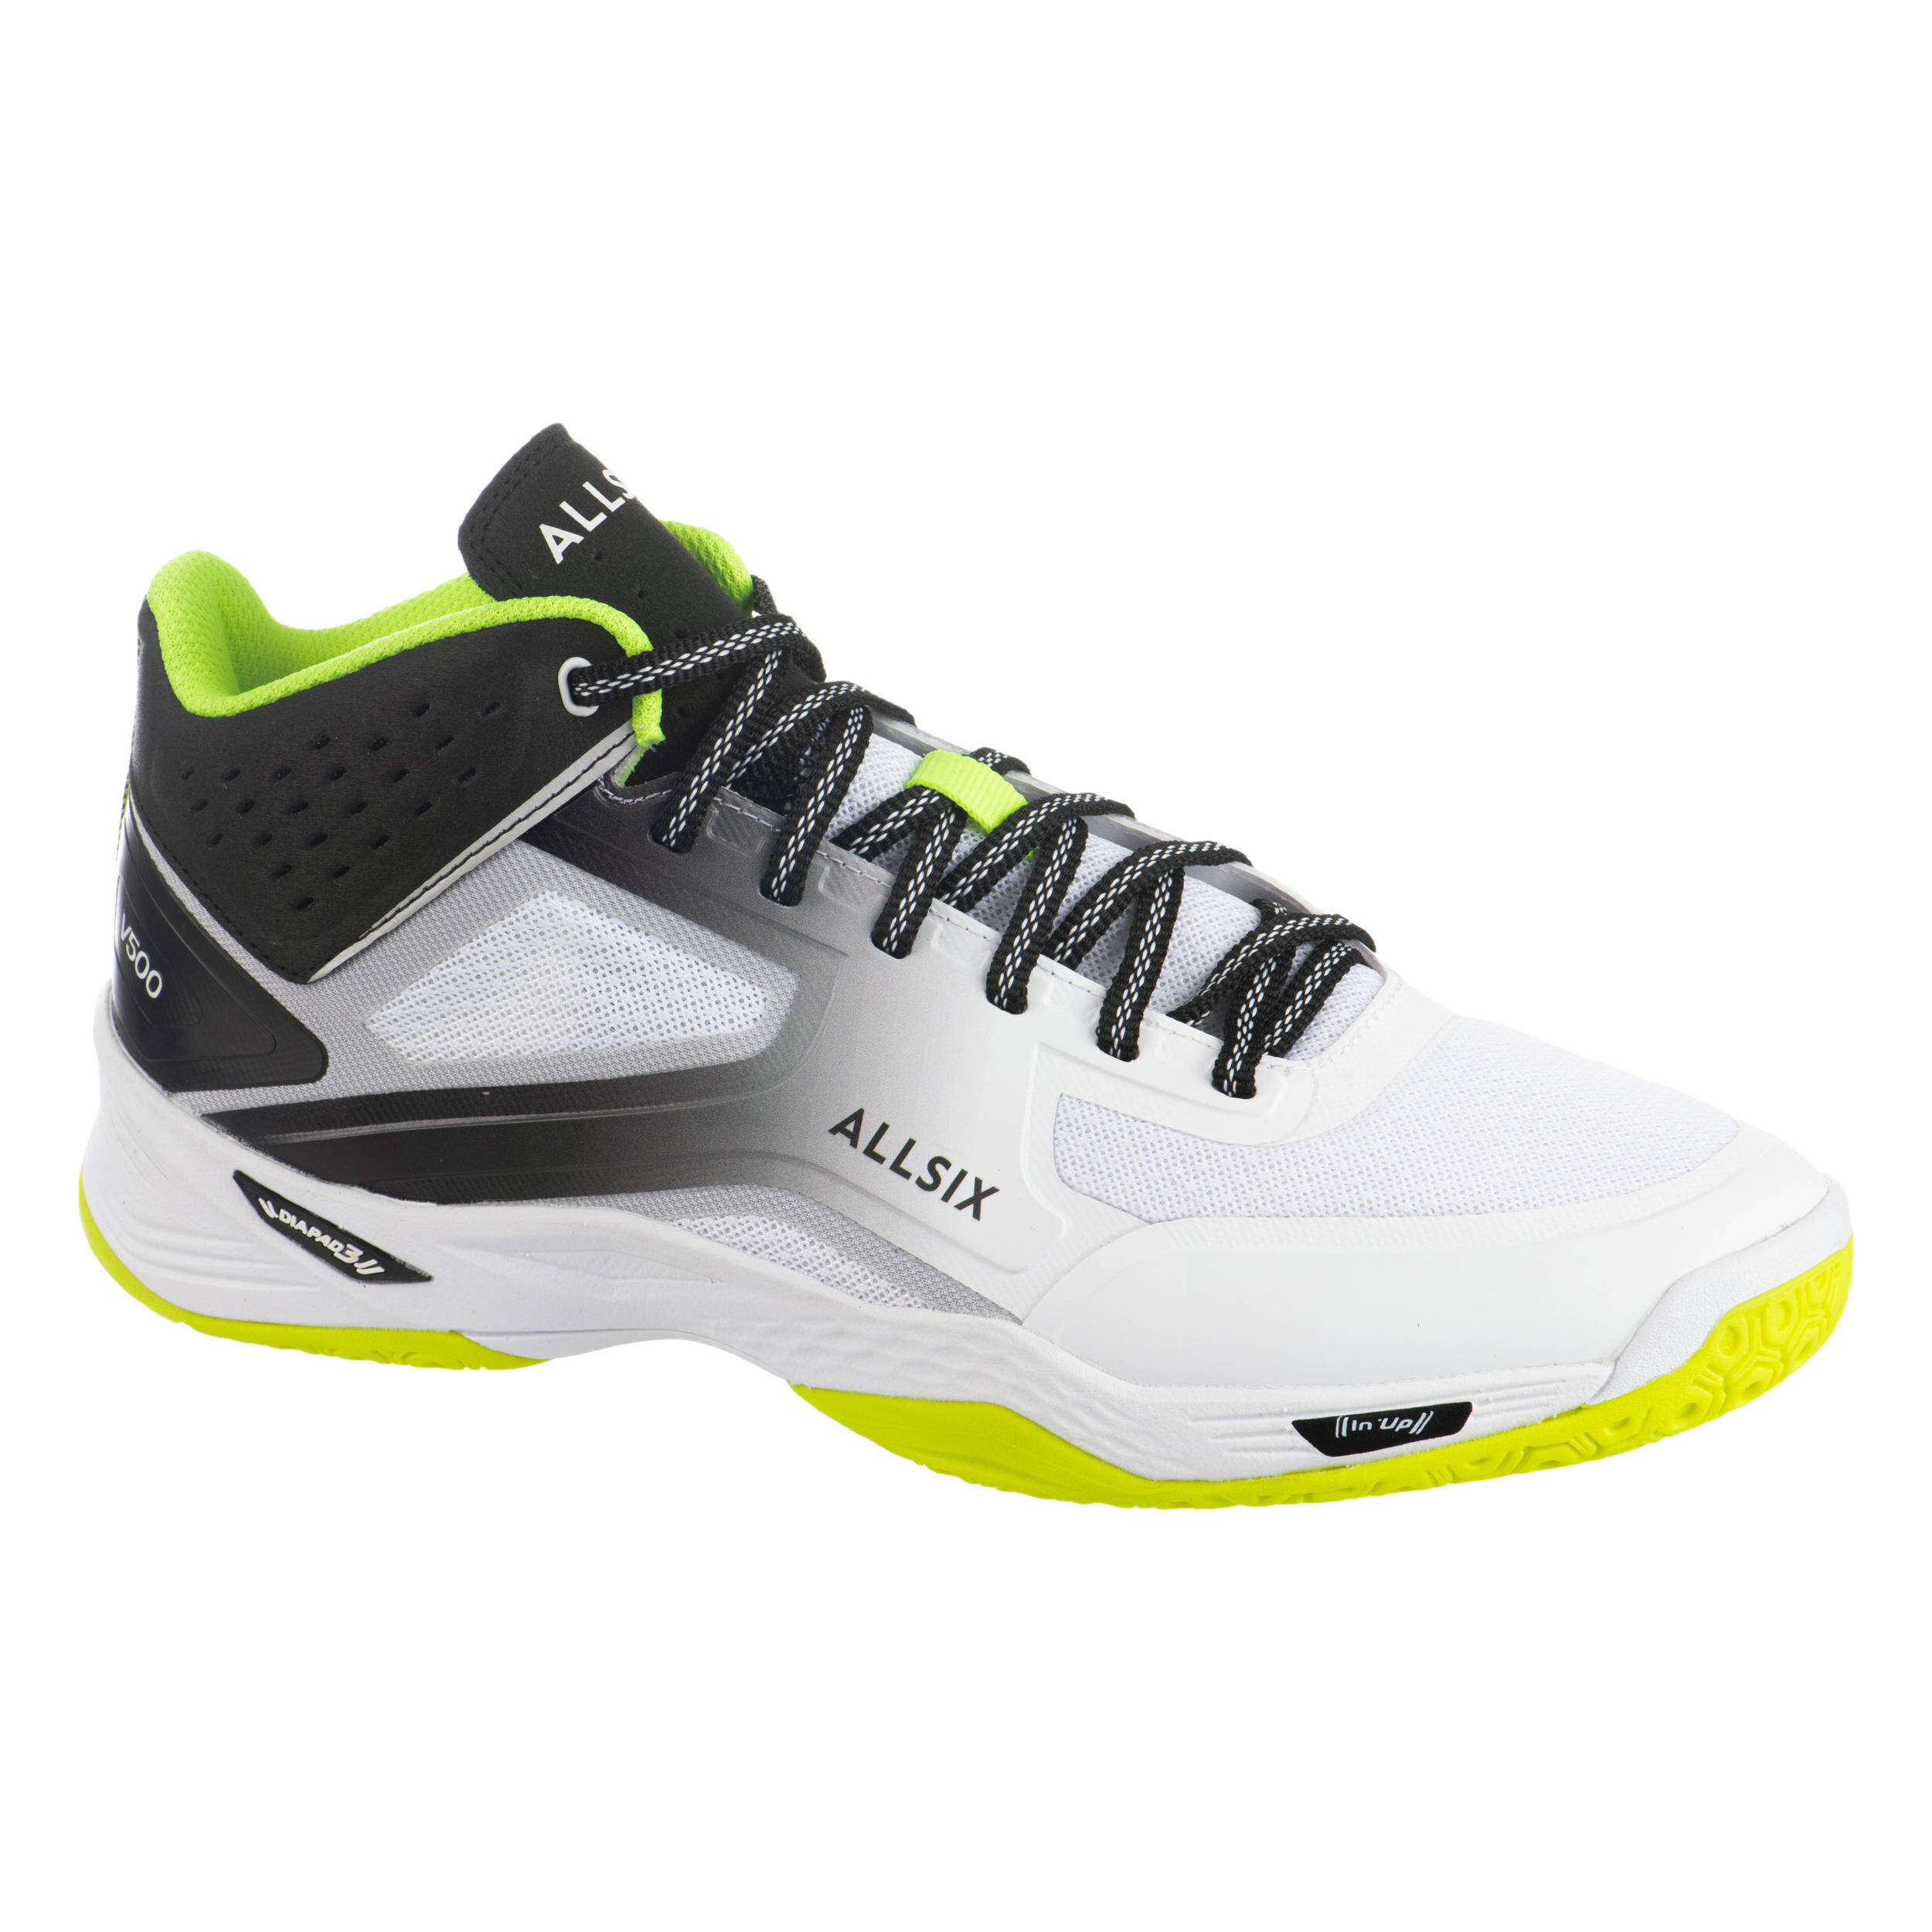 ALLSIX Men's Volleyball Mid Shoes V500 - White/Yellow/Black